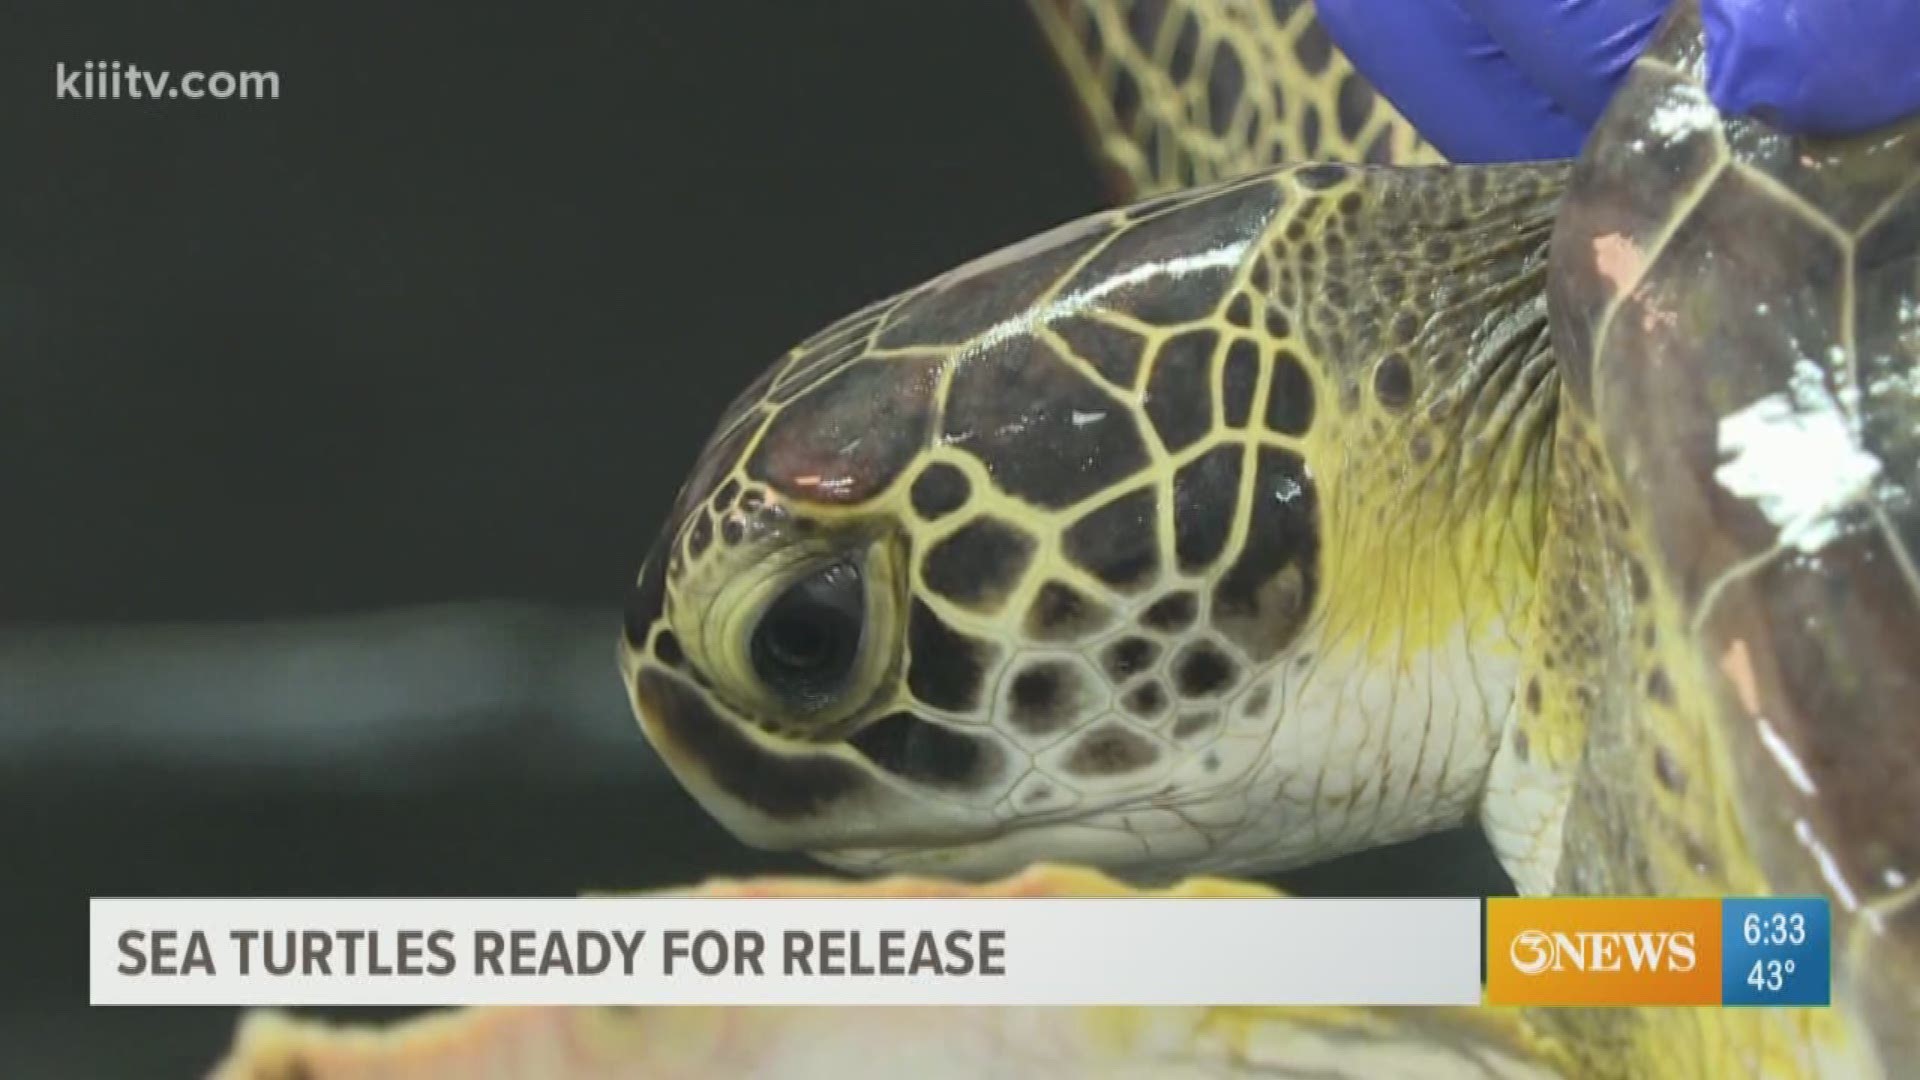 Over 100 sea turtles were rescued from the shivering Coastal Bend waters